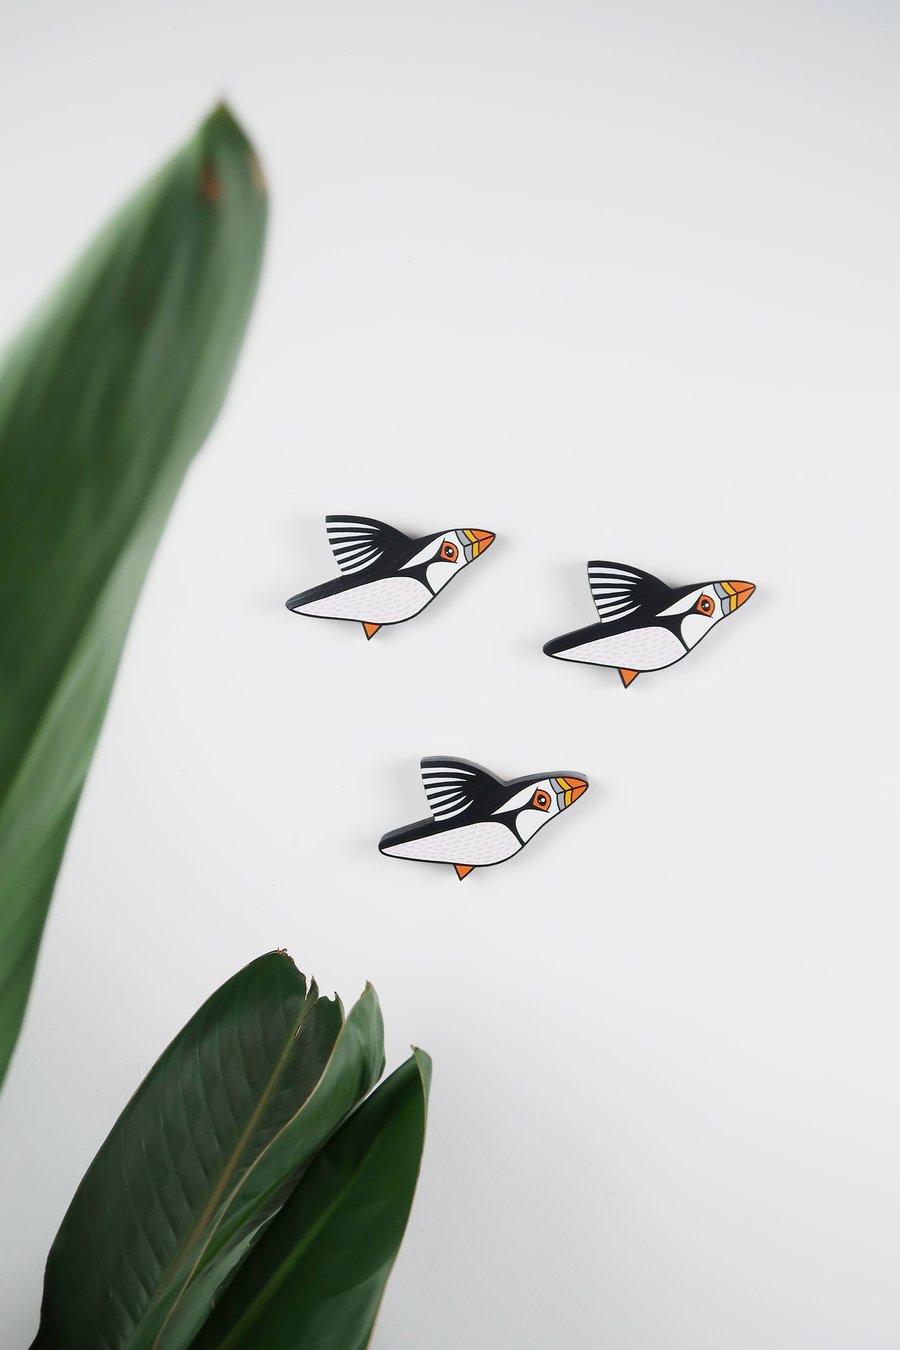 Puffin wall decoration, set of 3 flying miniature birds, wooden hand painted.